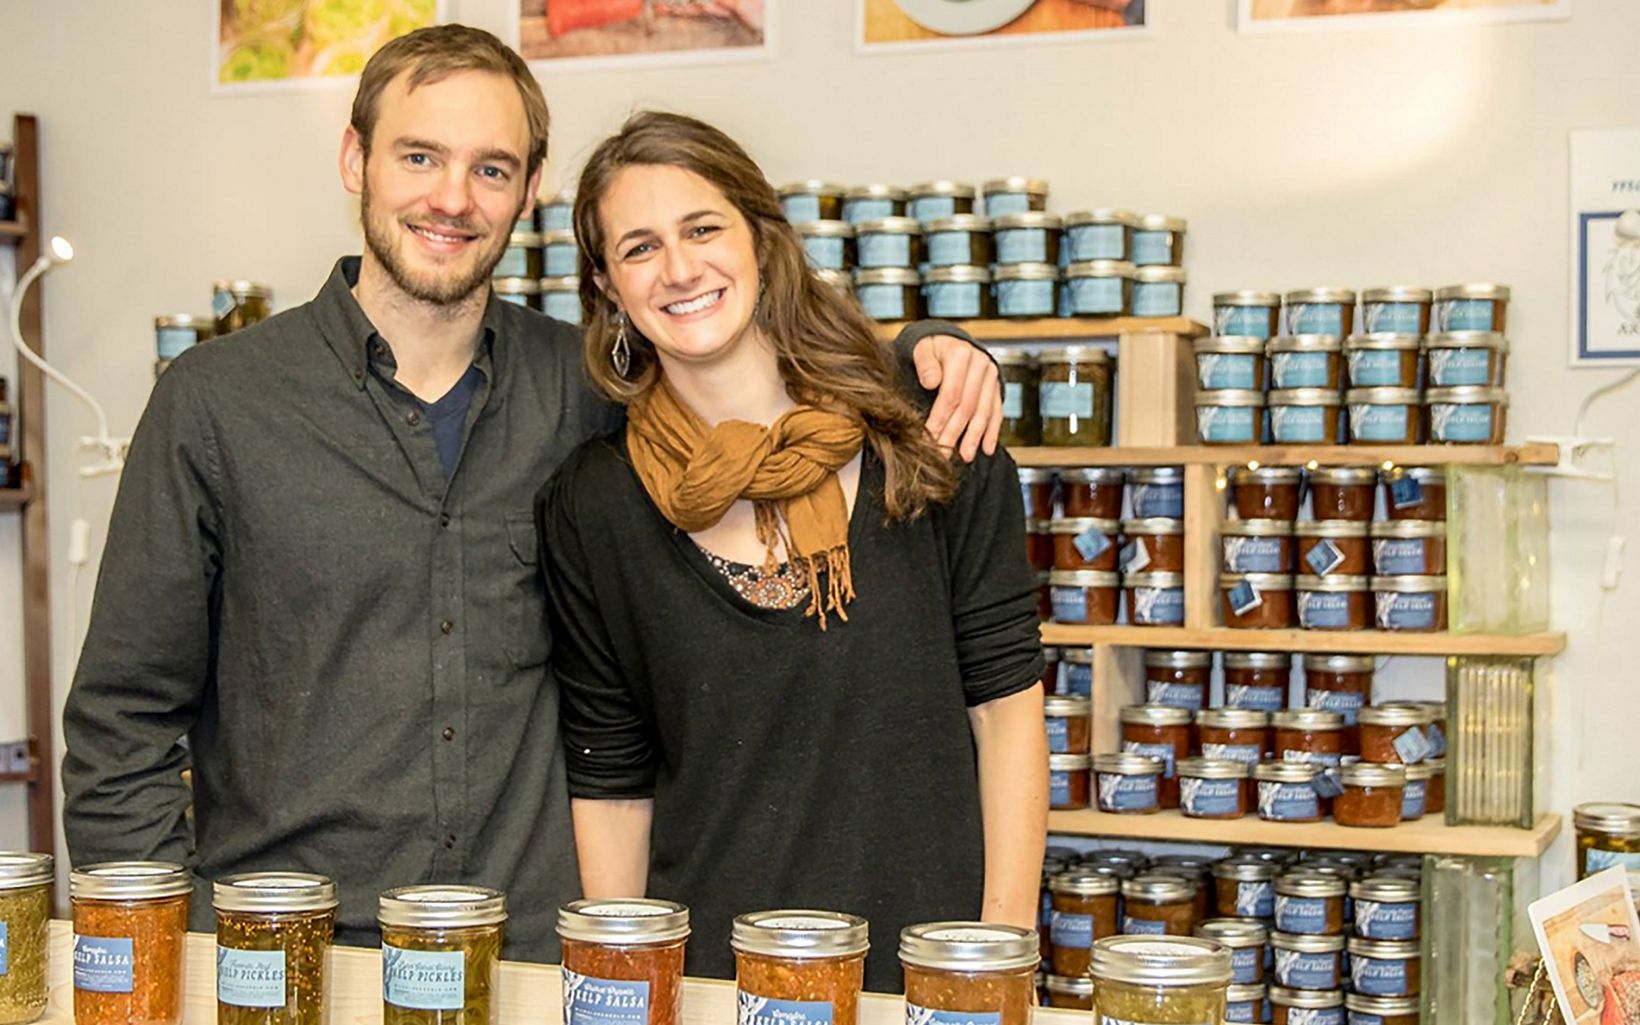 Founders of Barnacle Foods: Kelp from the sea is a key ingredient in the product offerings of Barnacle Foods, a Path to Prosperity contest winner. © Barnacle Foods